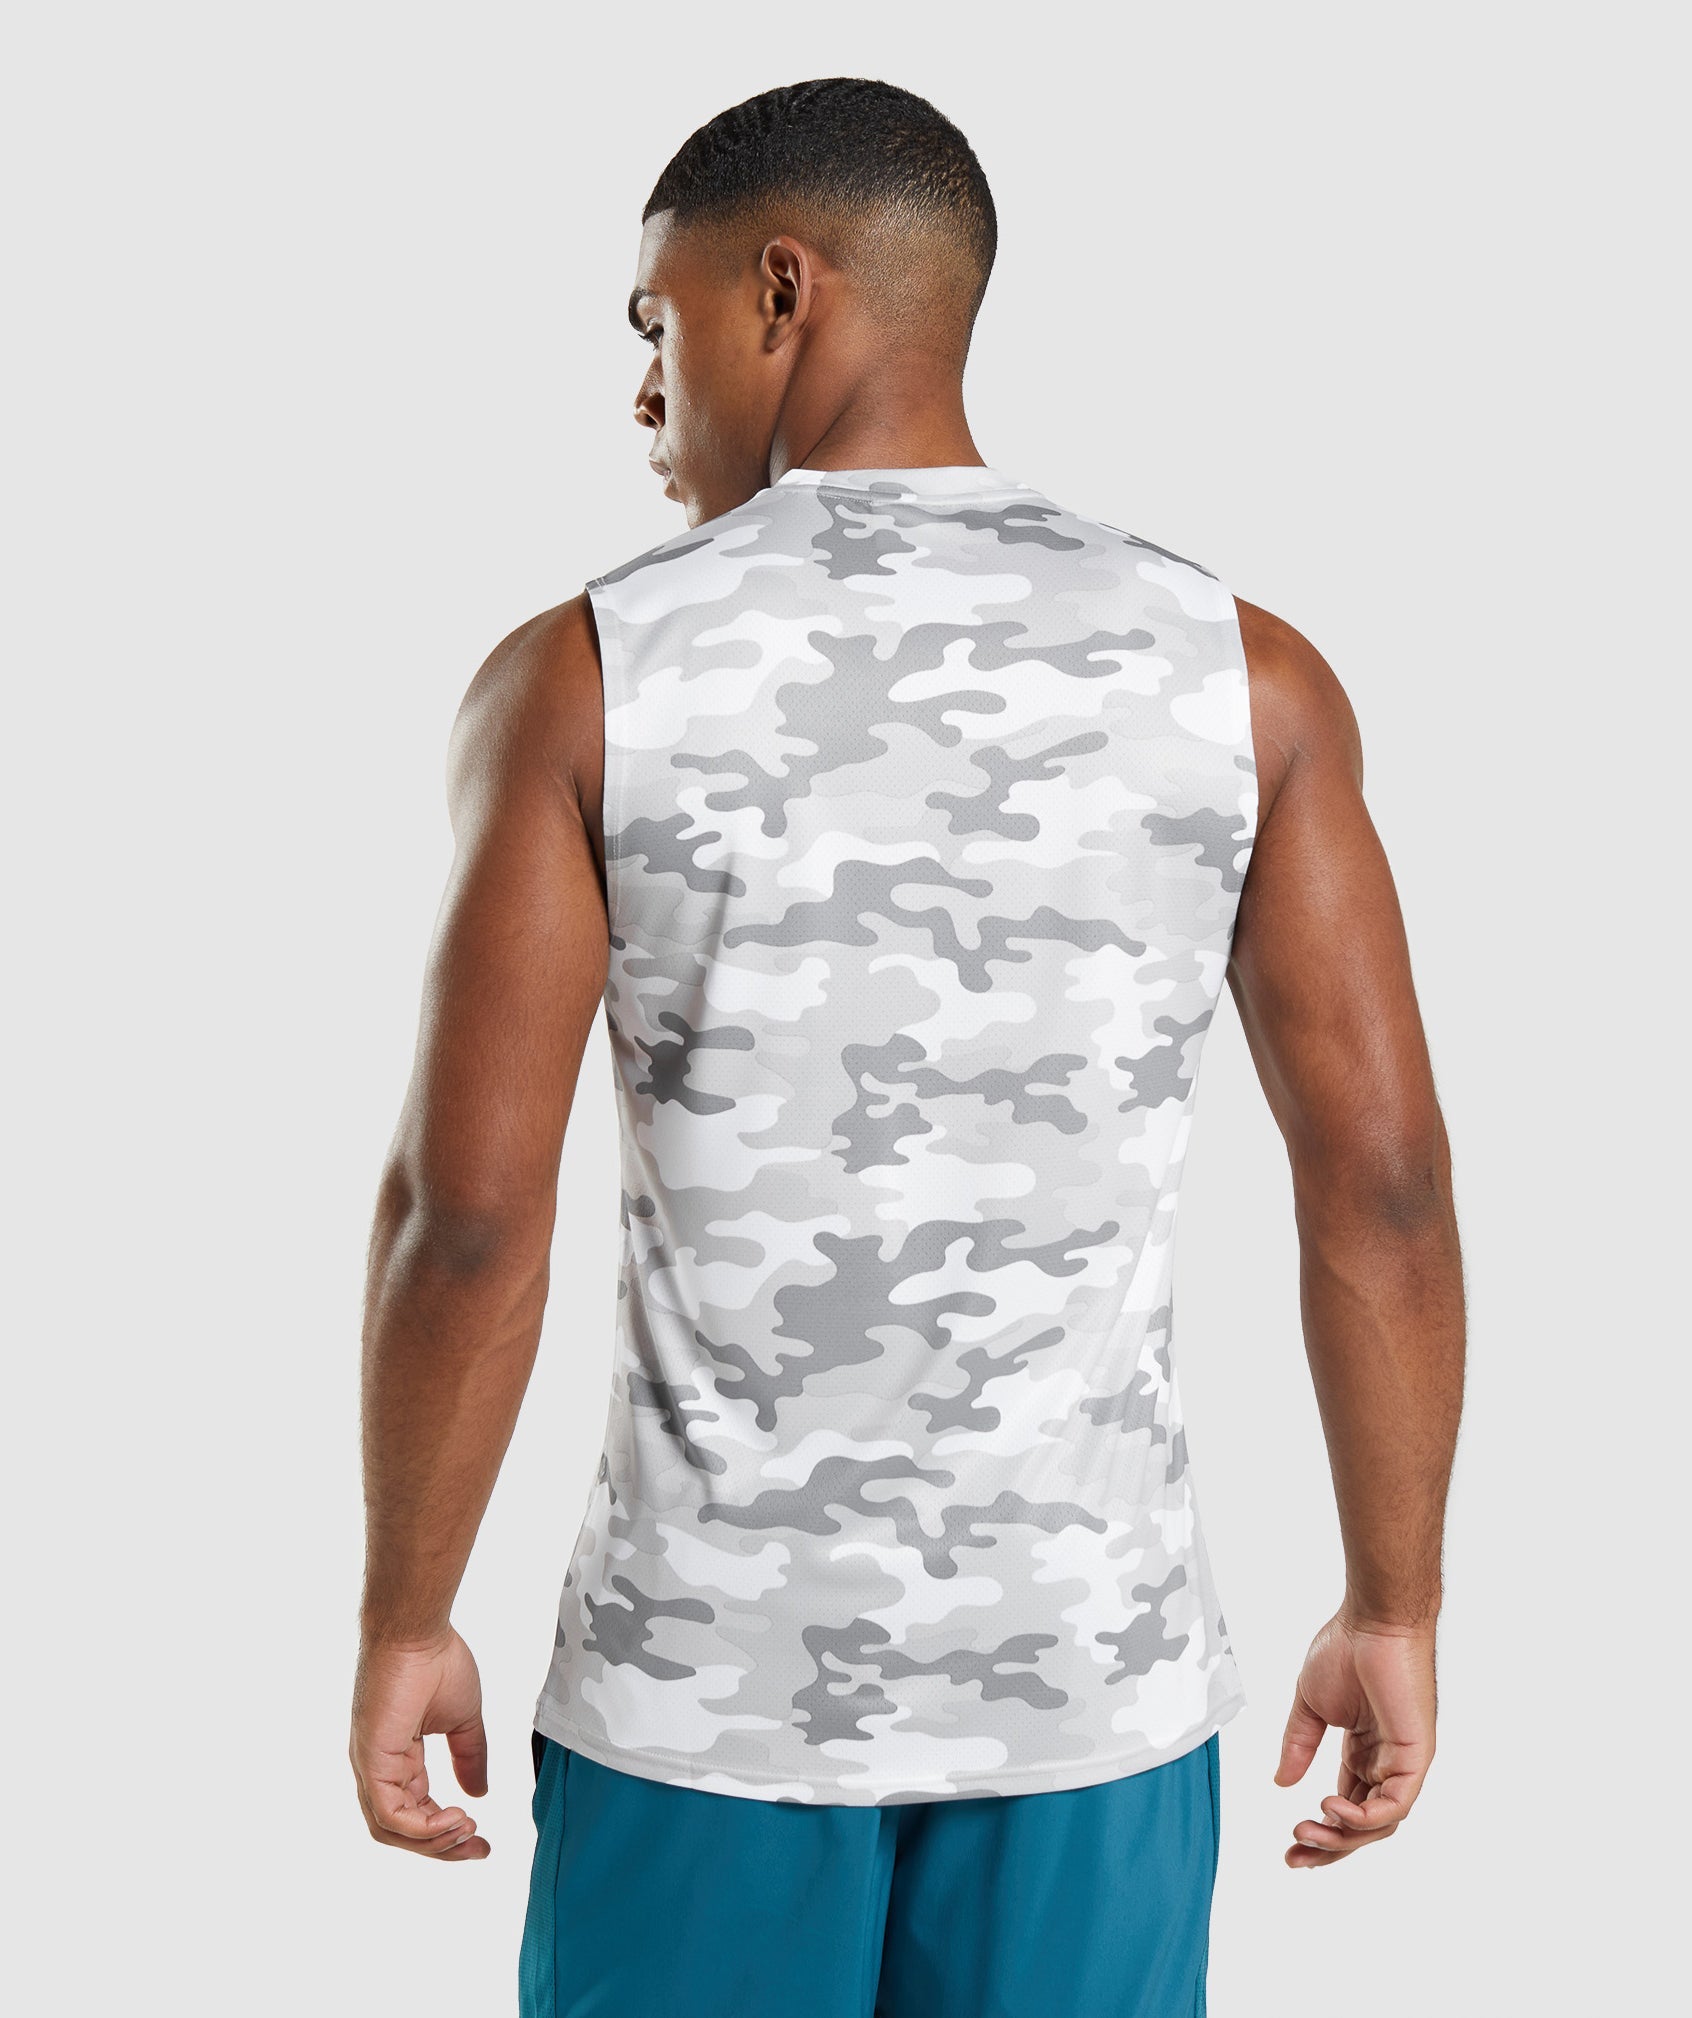 Arrival Sleeveless T-Shirt in Light Grey Print - view 3